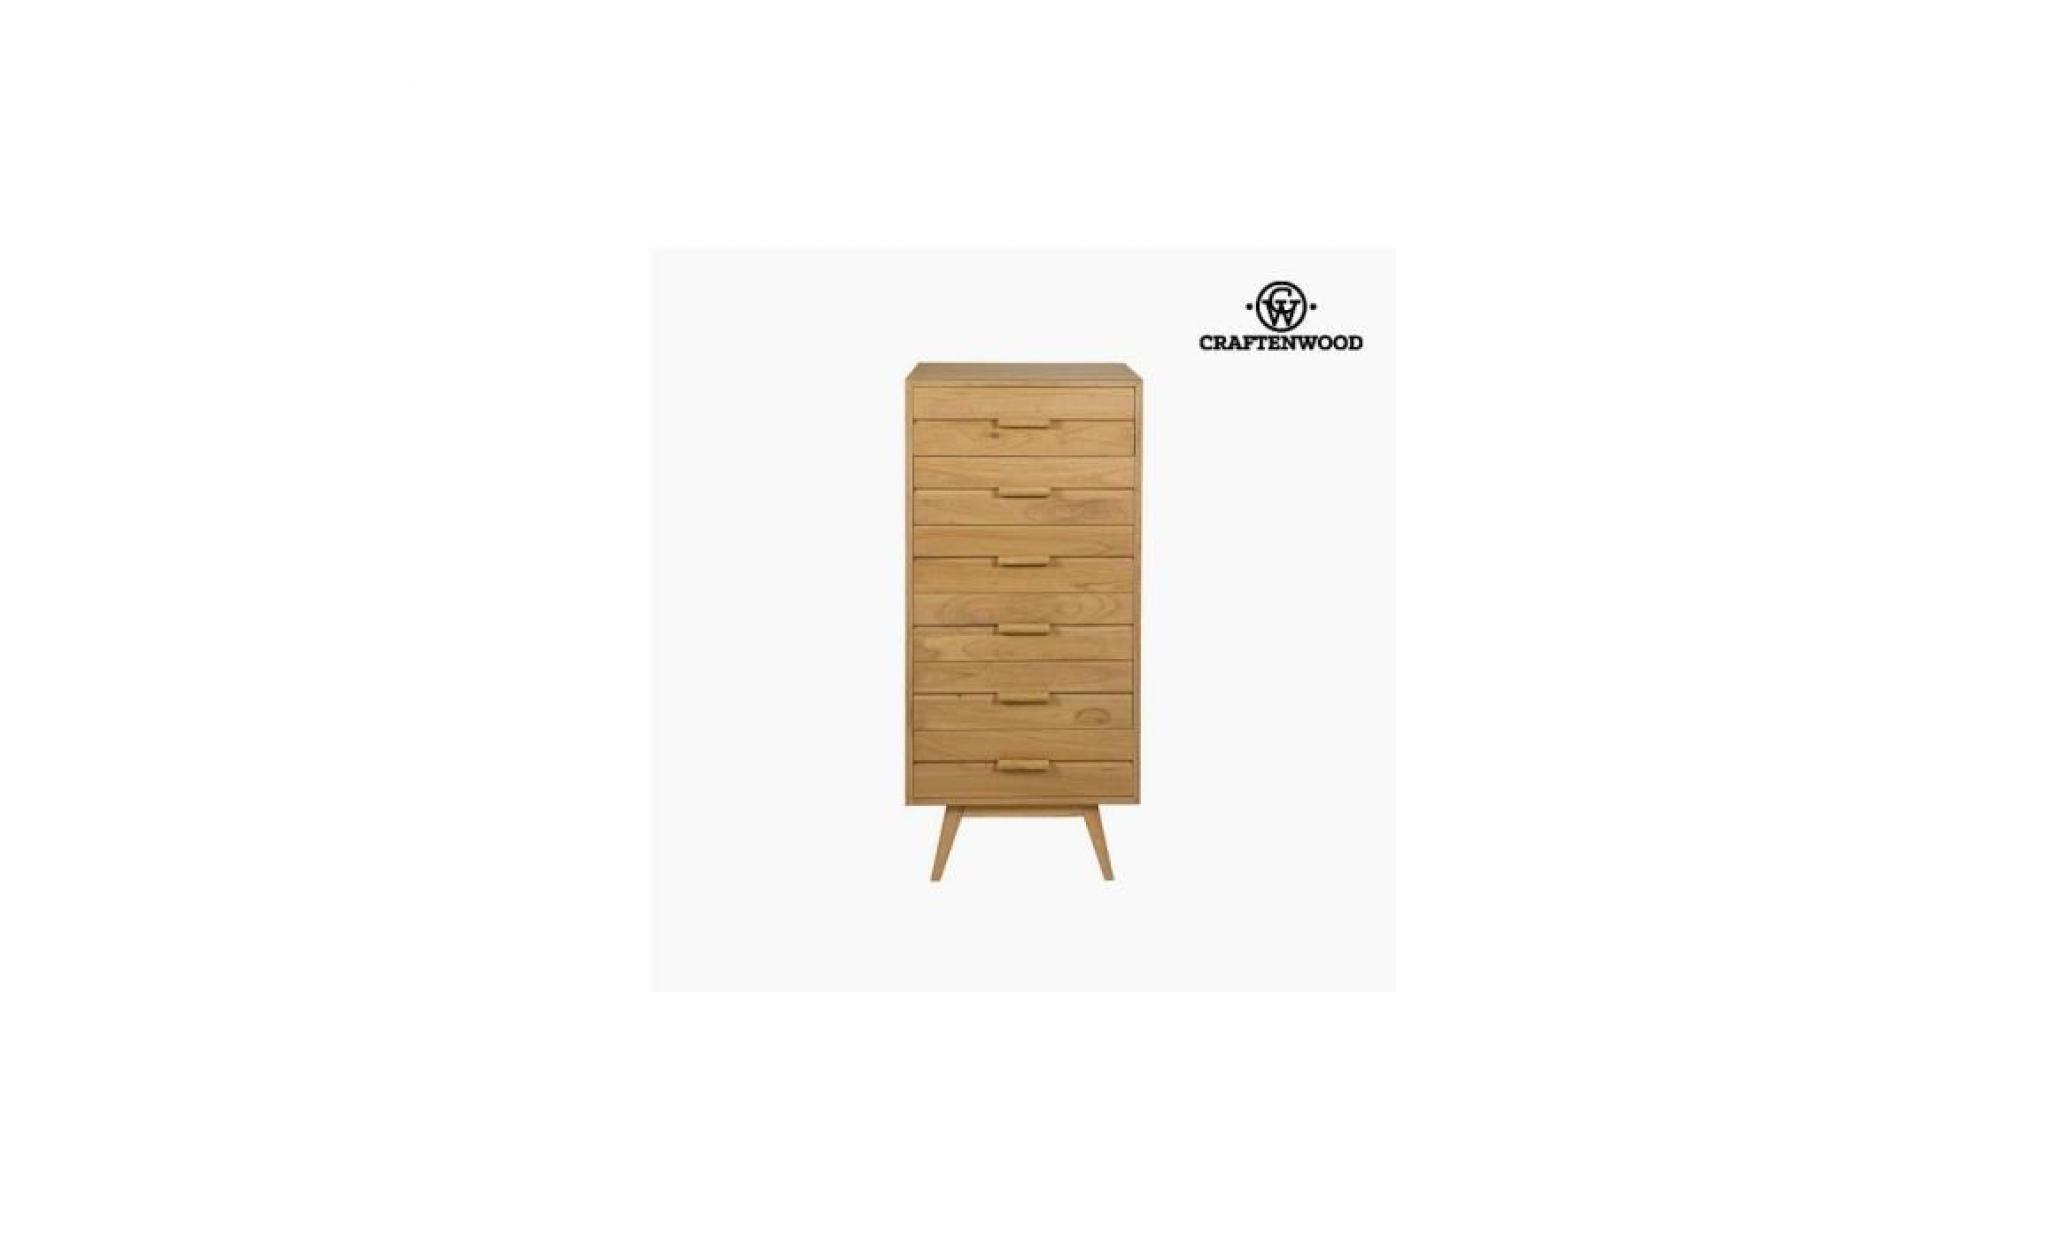 chiffonnier bois mindi (118 x 55 x 40 cm)   collection serious line by craftenwood   s0106163 pas cher